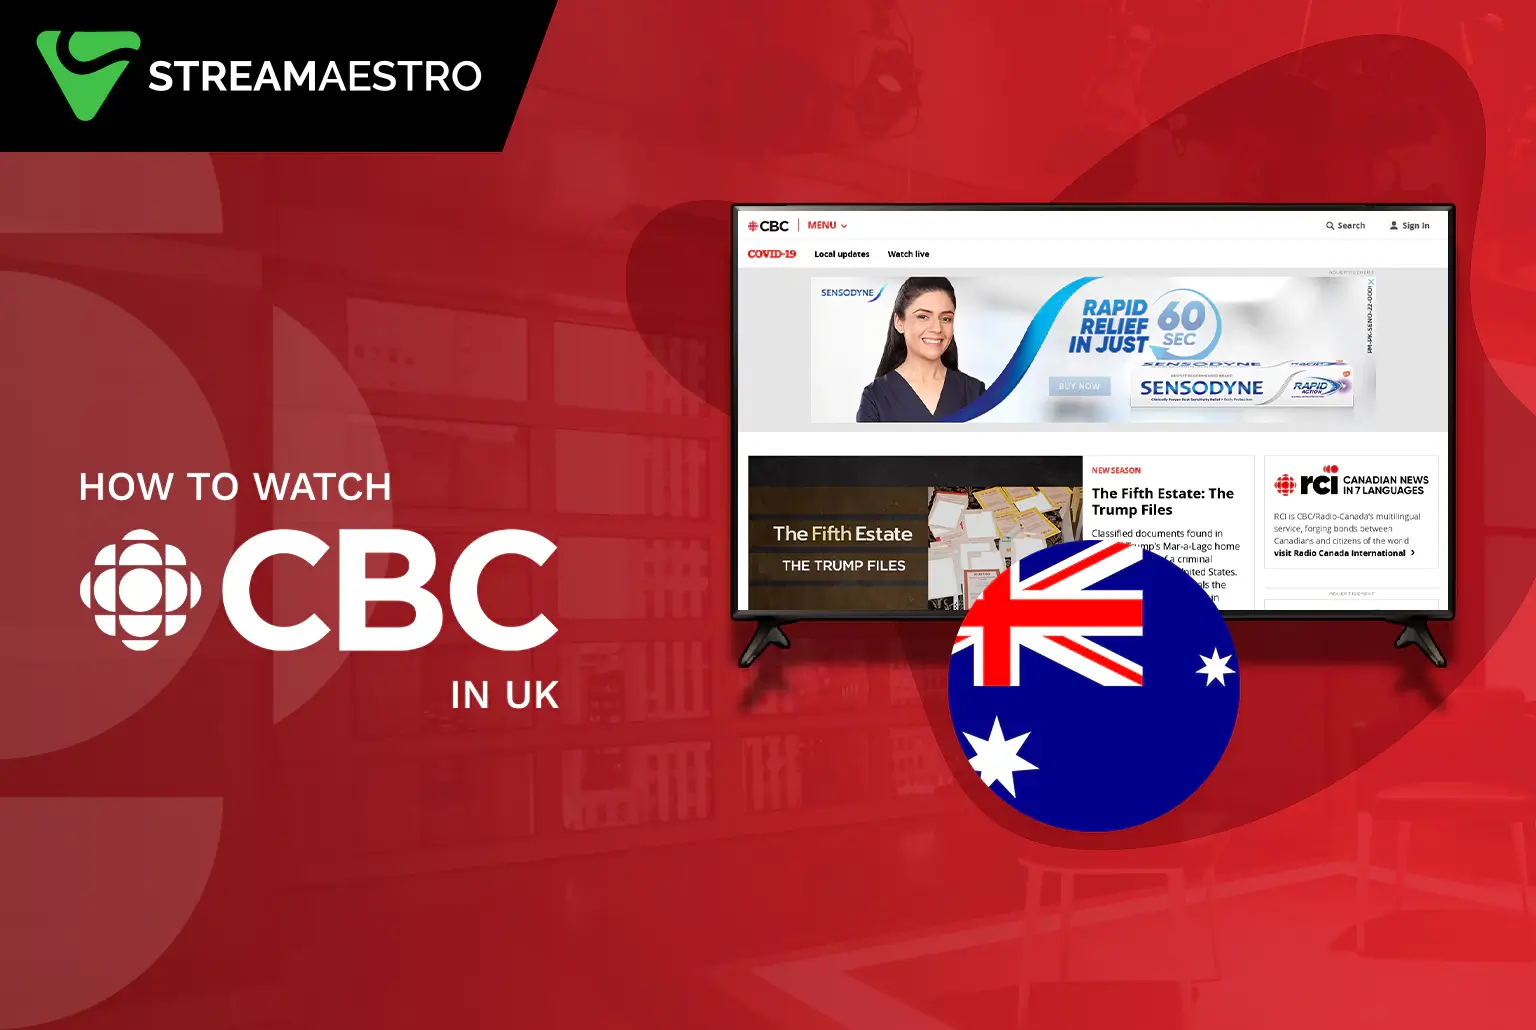 Watch CBC in UK